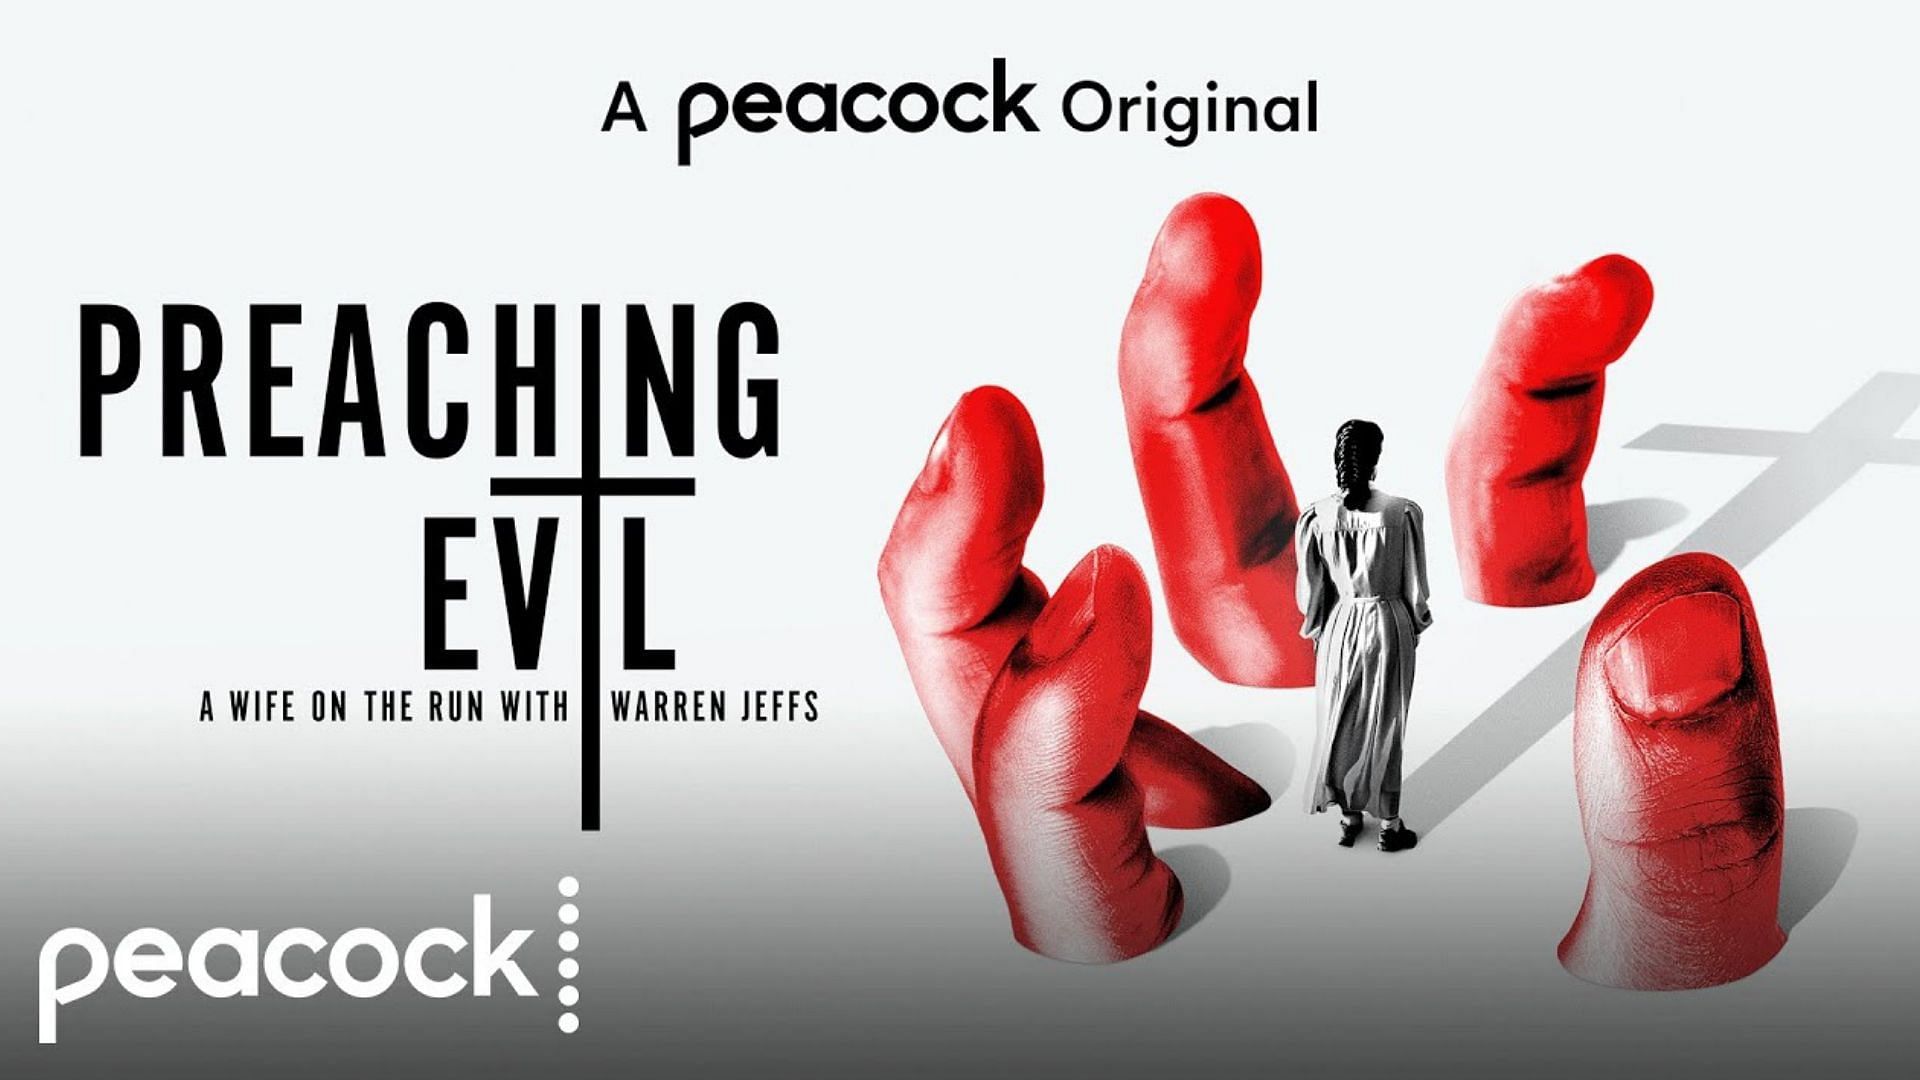 The promotional poster for Preaching Evil: A Wife on the Run with Warren Jeffs (Image via Peacock)